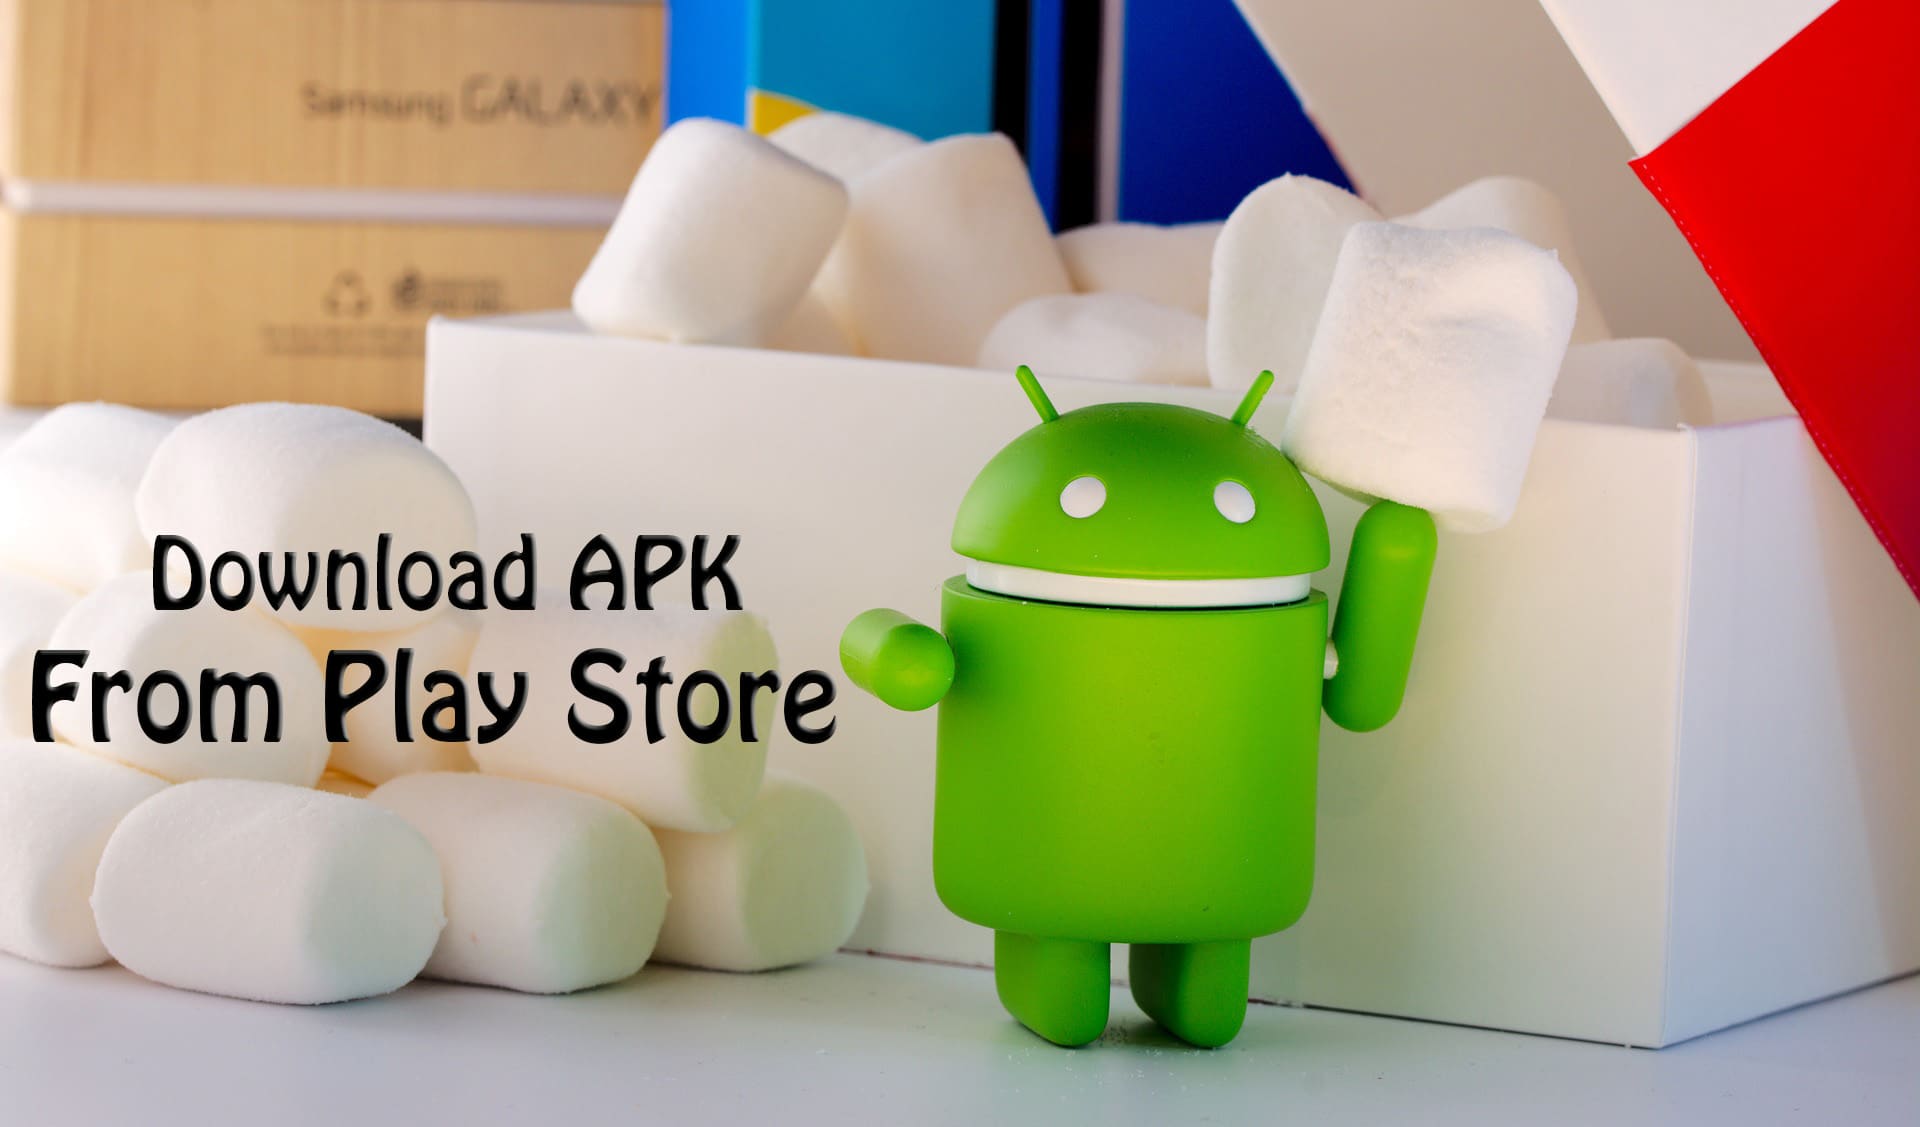 Download APK From Play Store